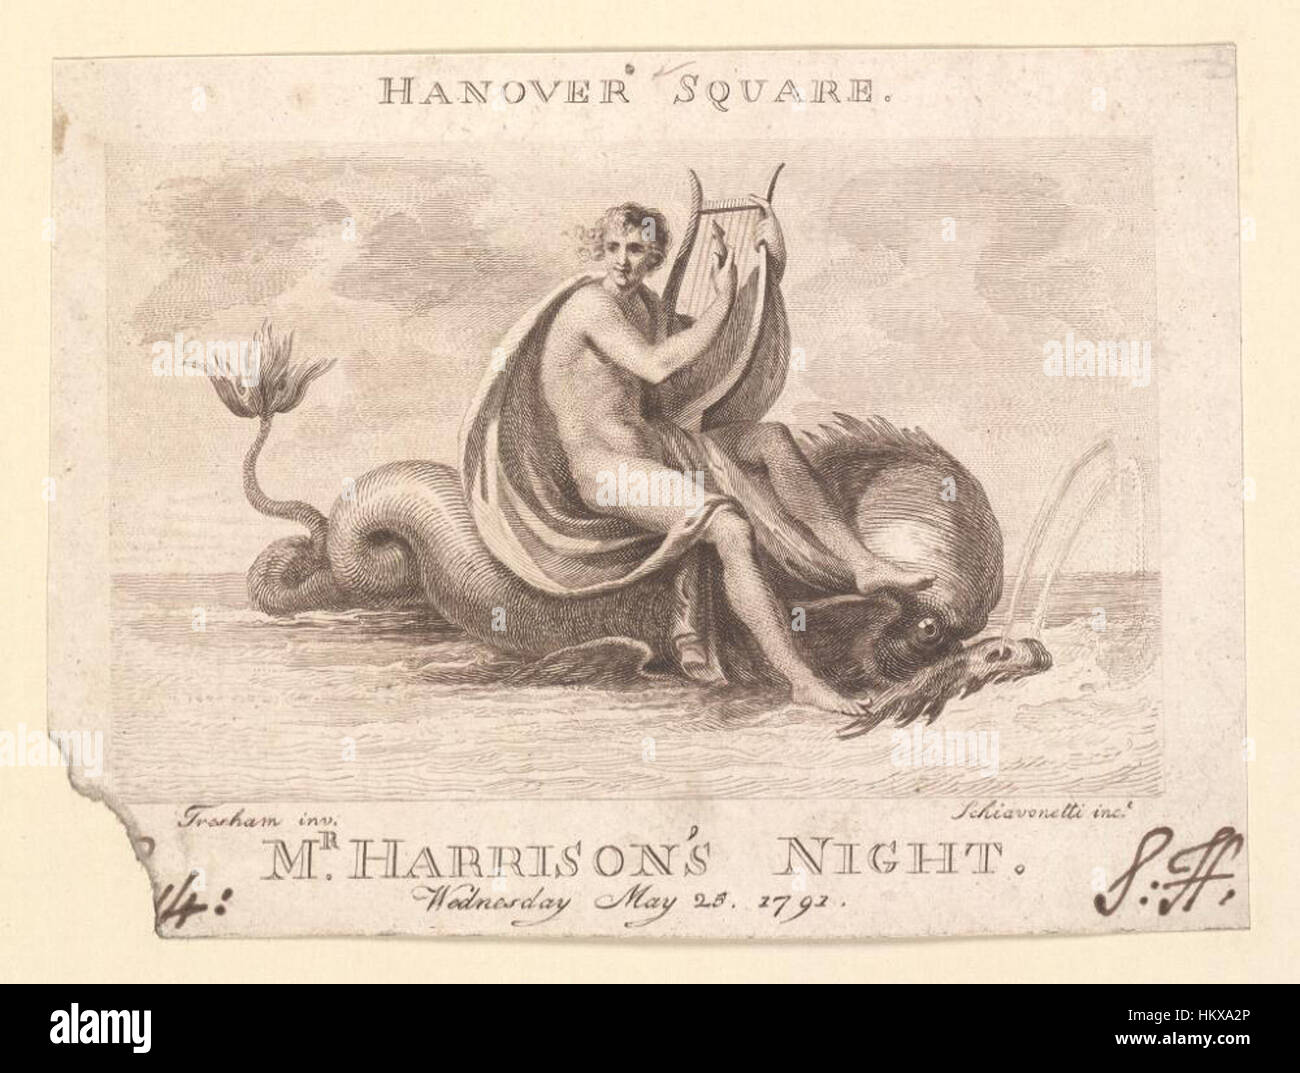 Bodleian Libraries, Ticket of Hanover Square, Wednesday May 25 1791, announcing Mr. Harrison's night Stock Photo